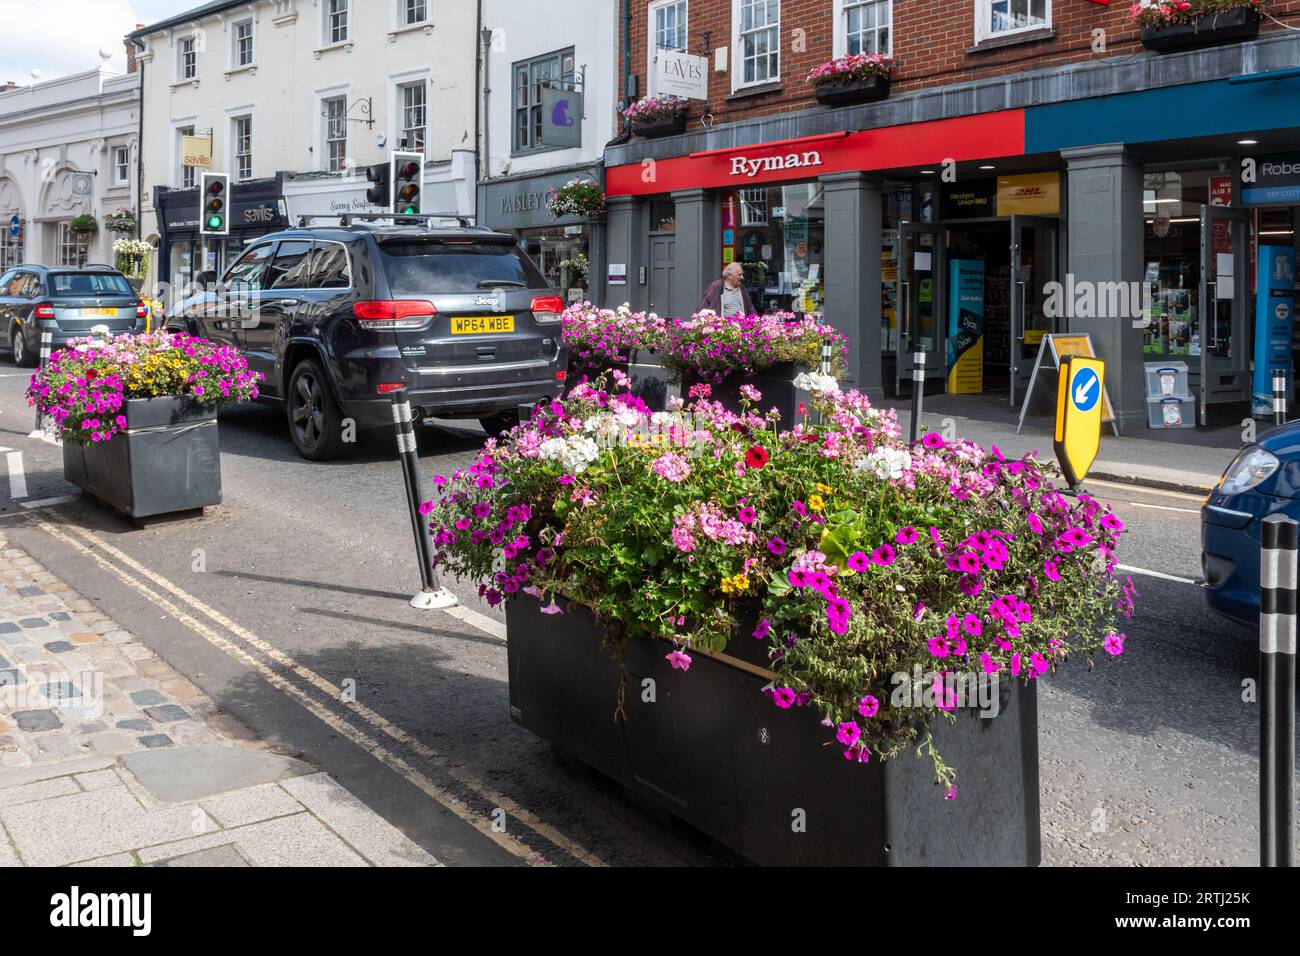 Traffic calming scheme, planters filled with flowers placed in the road to narrow it and slow traffic, Farnham town centre, Surrey, England, UK Stock Photo